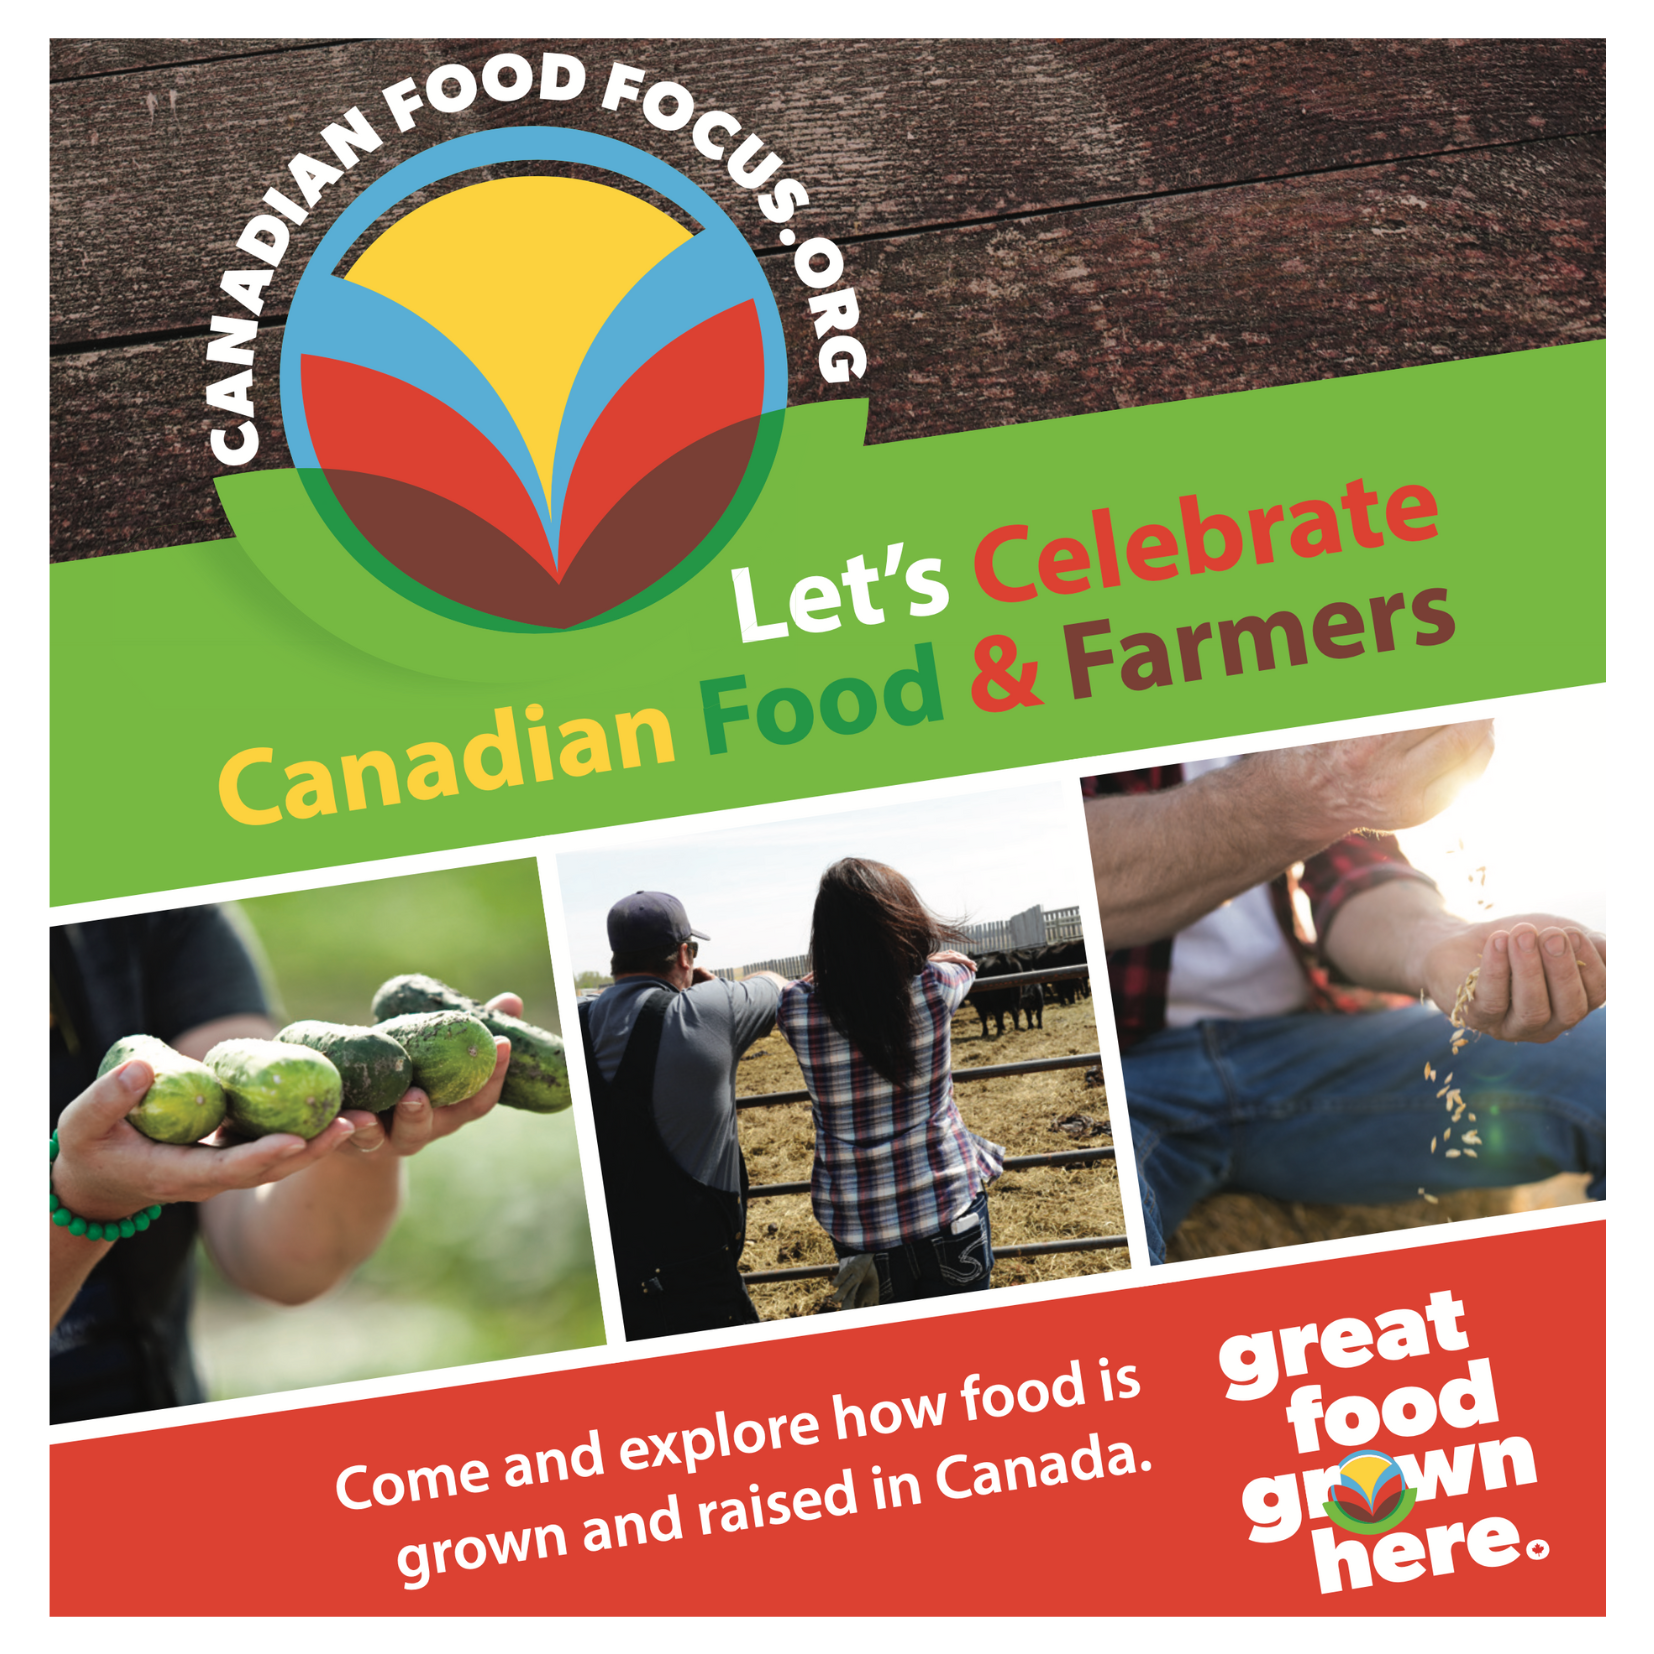 Let's celebrate Canadian Food & Farmers with CFF